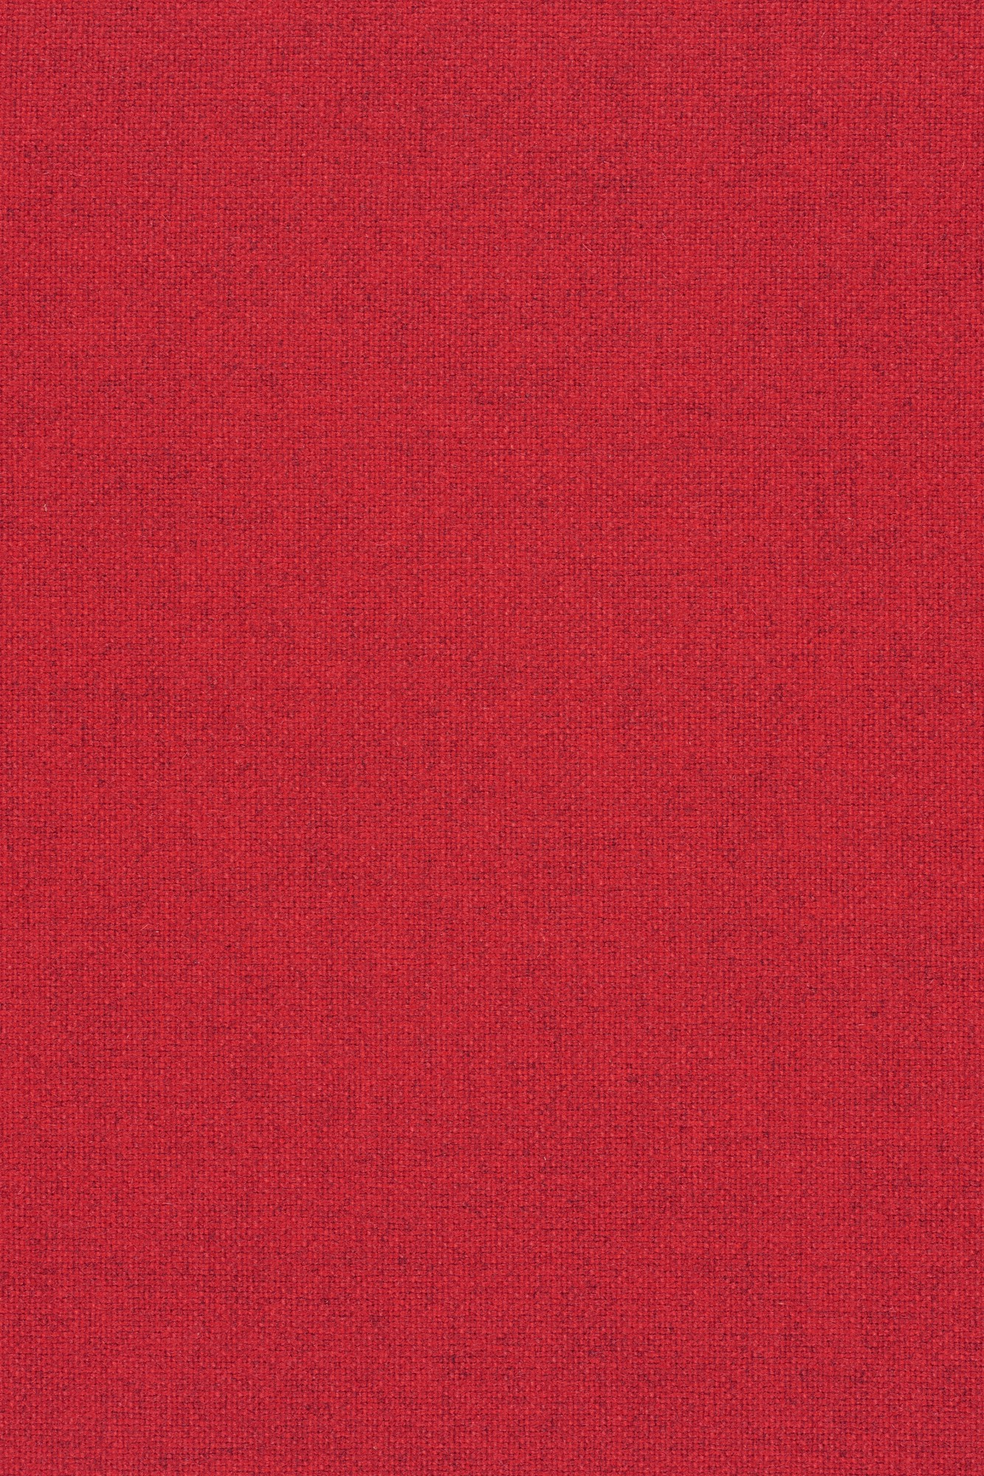 Fabric sample Tonica 2 643 red